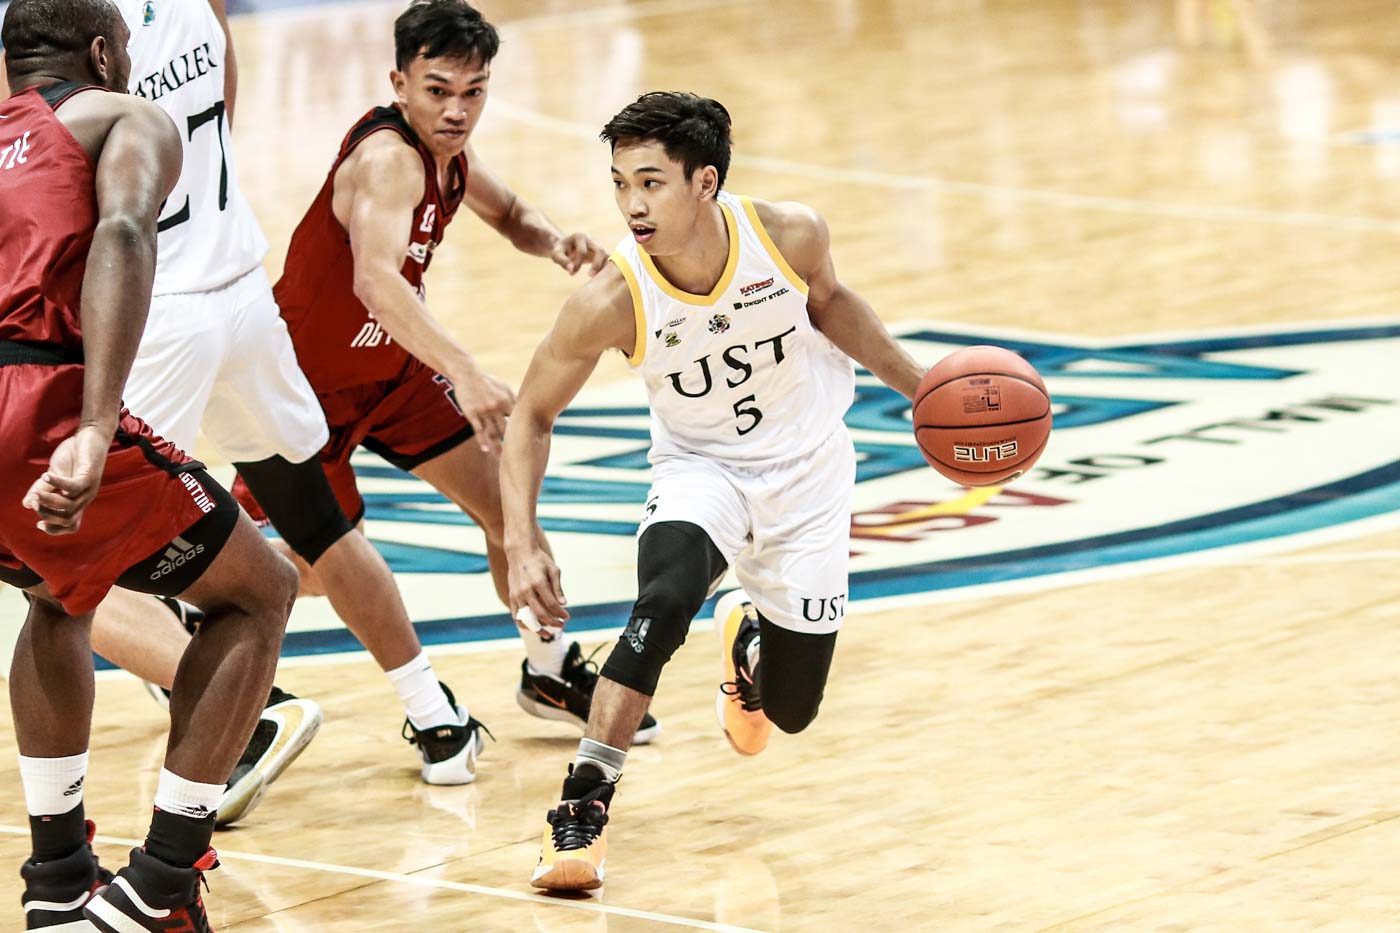 UST survives UP in injury-plagued thriller